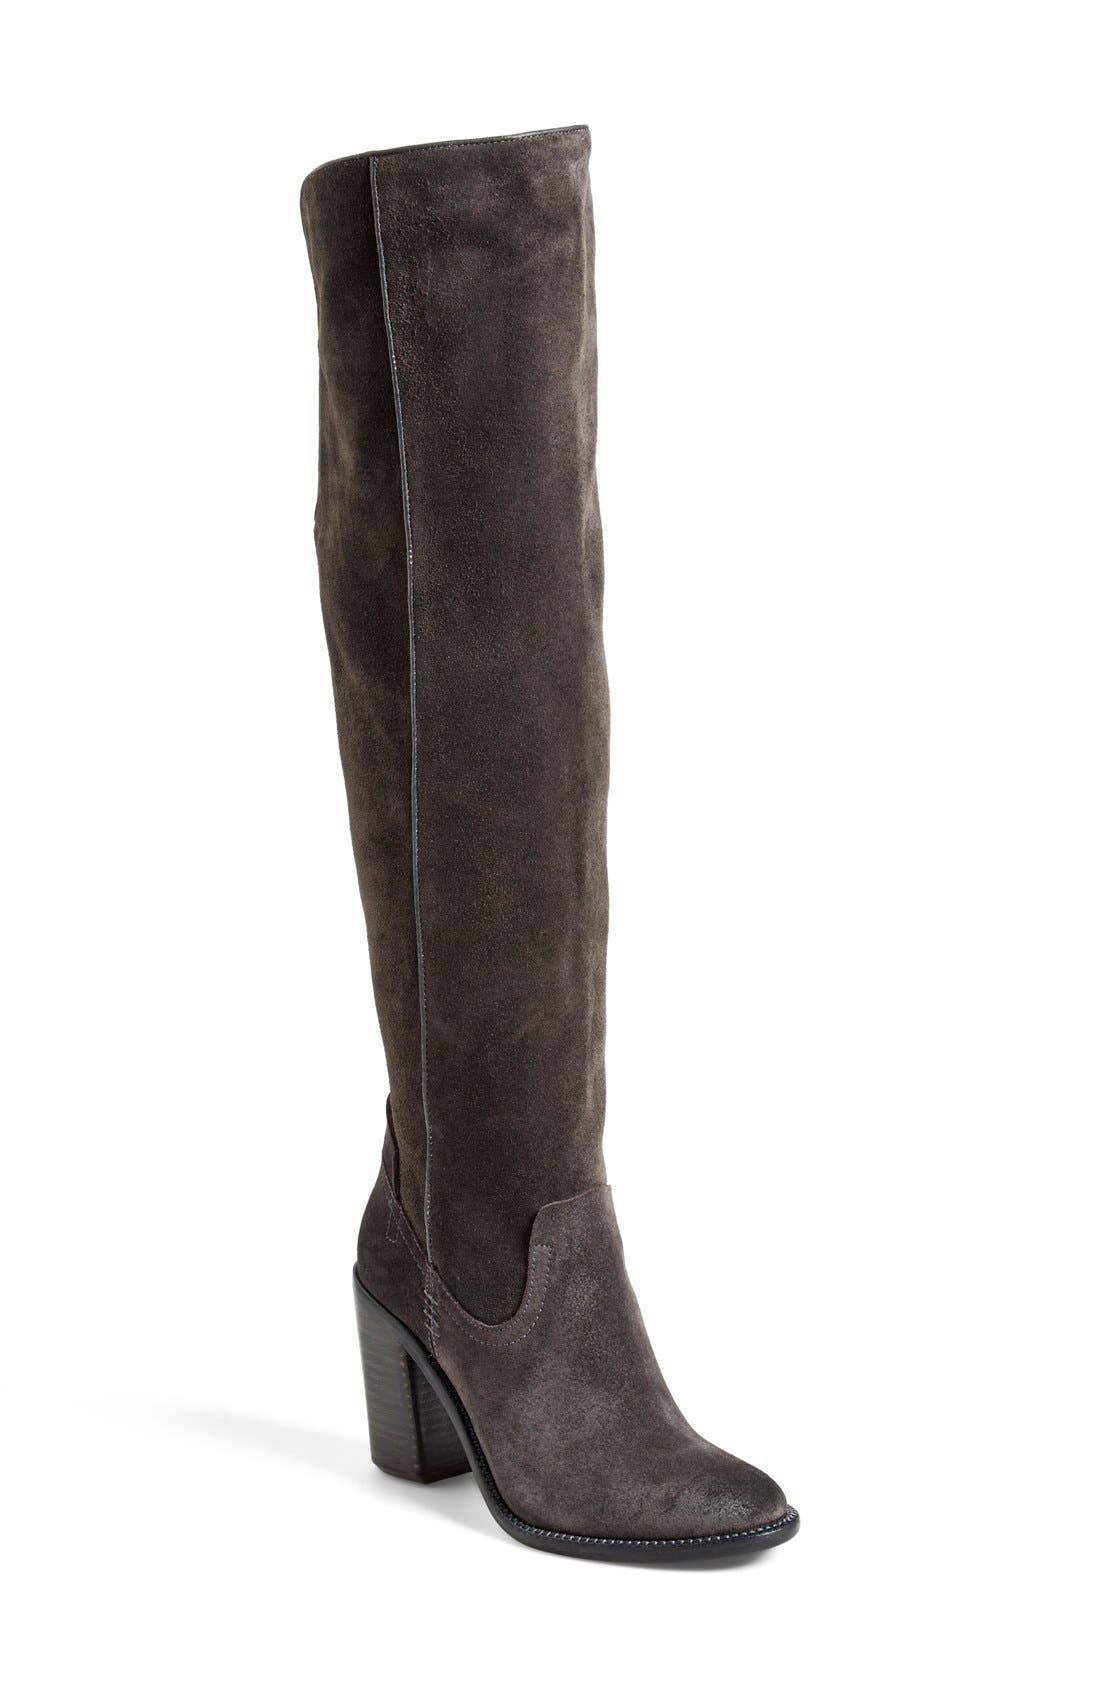 Dolce Vita 'Ohanna' Over the Knee Boot 